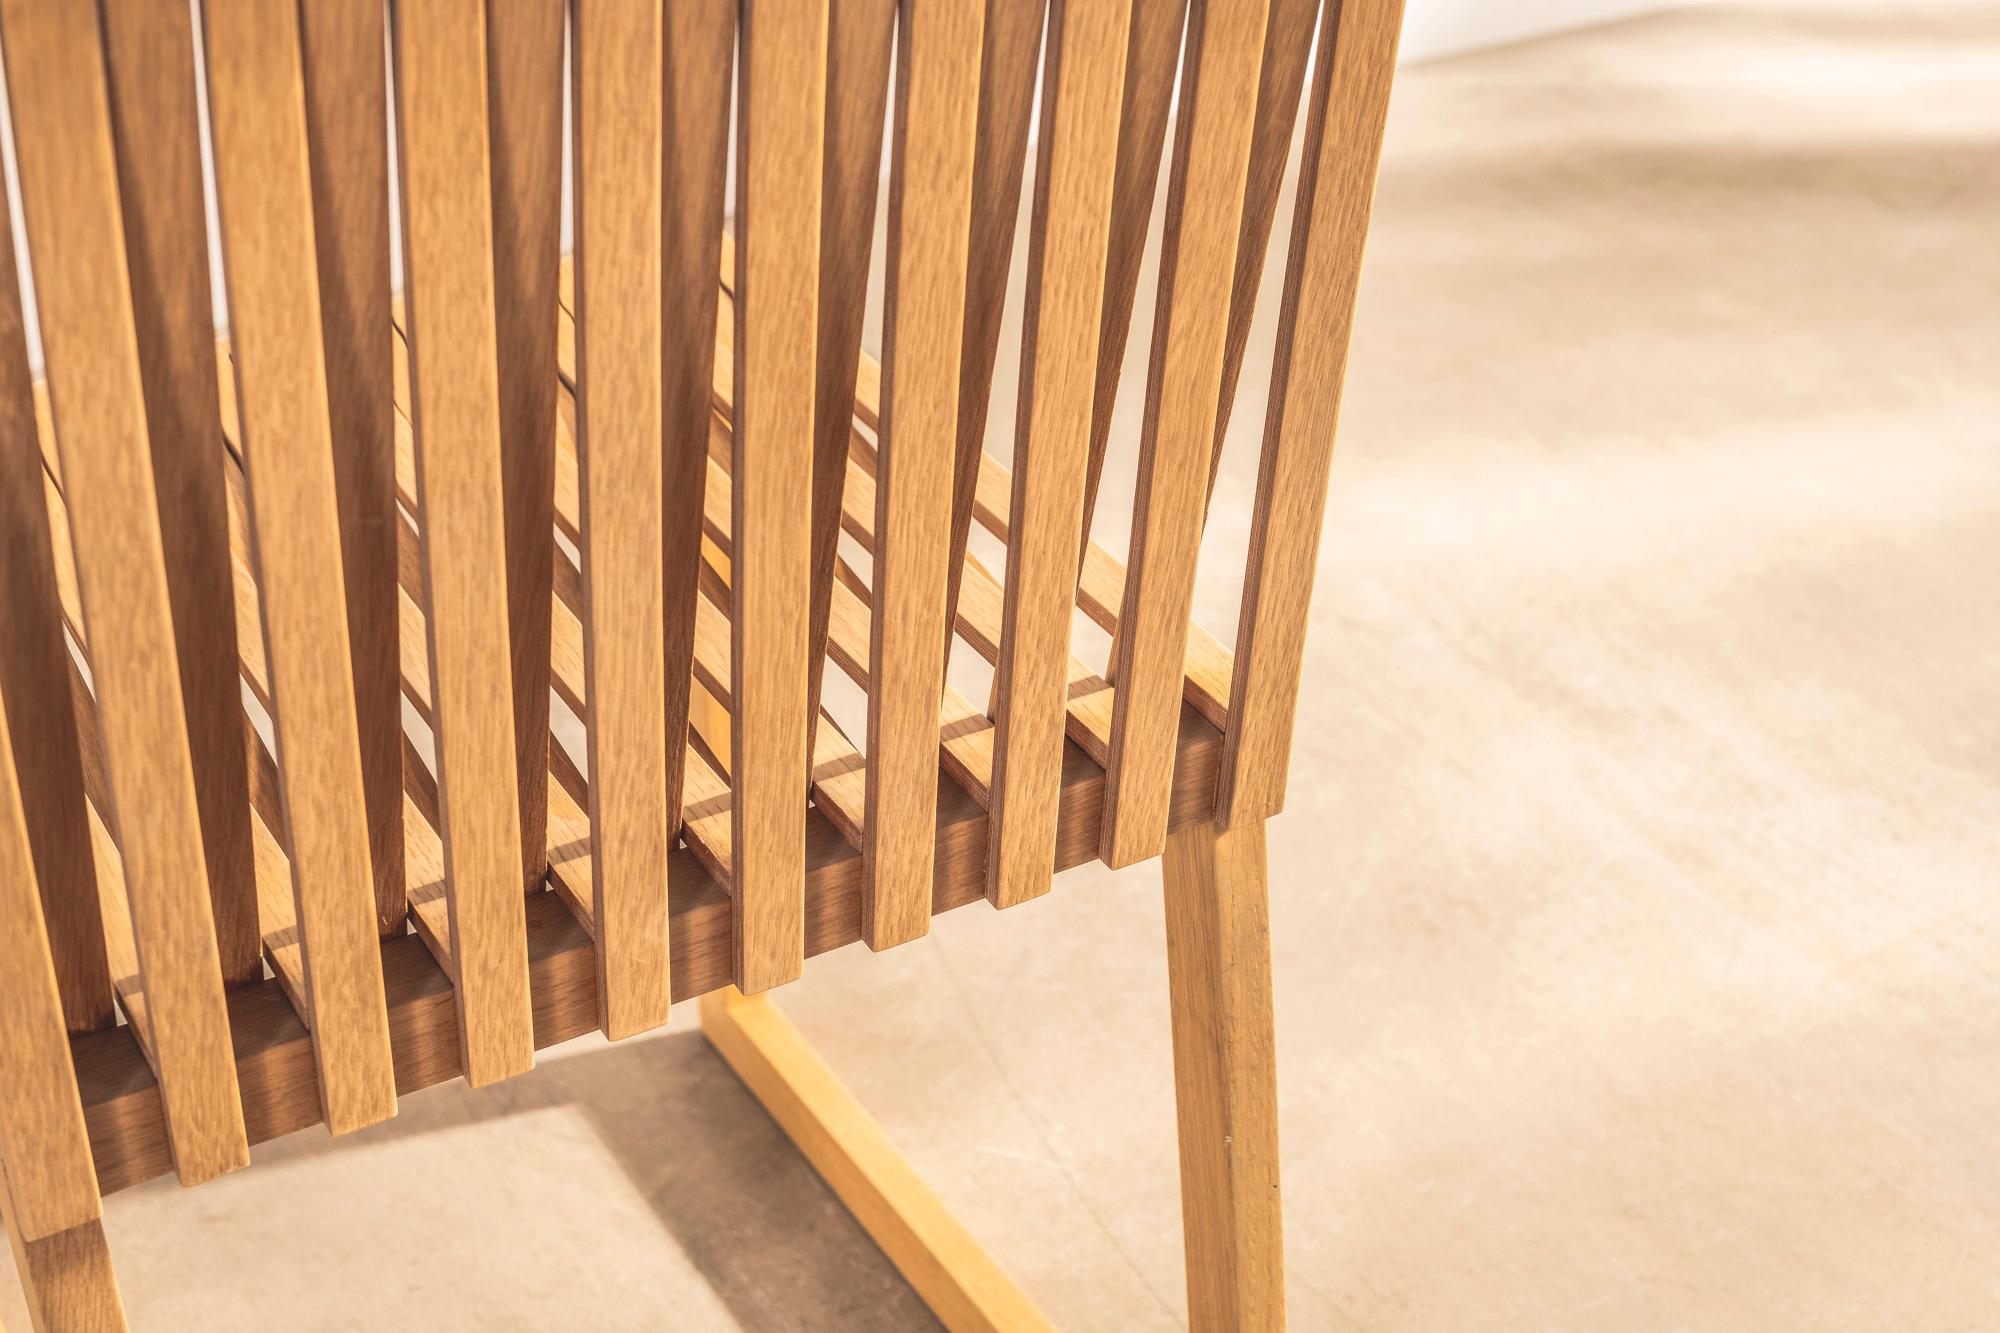 British Sculptural Oak Comb Chair by Shin and Tomoko Azumi For Sale